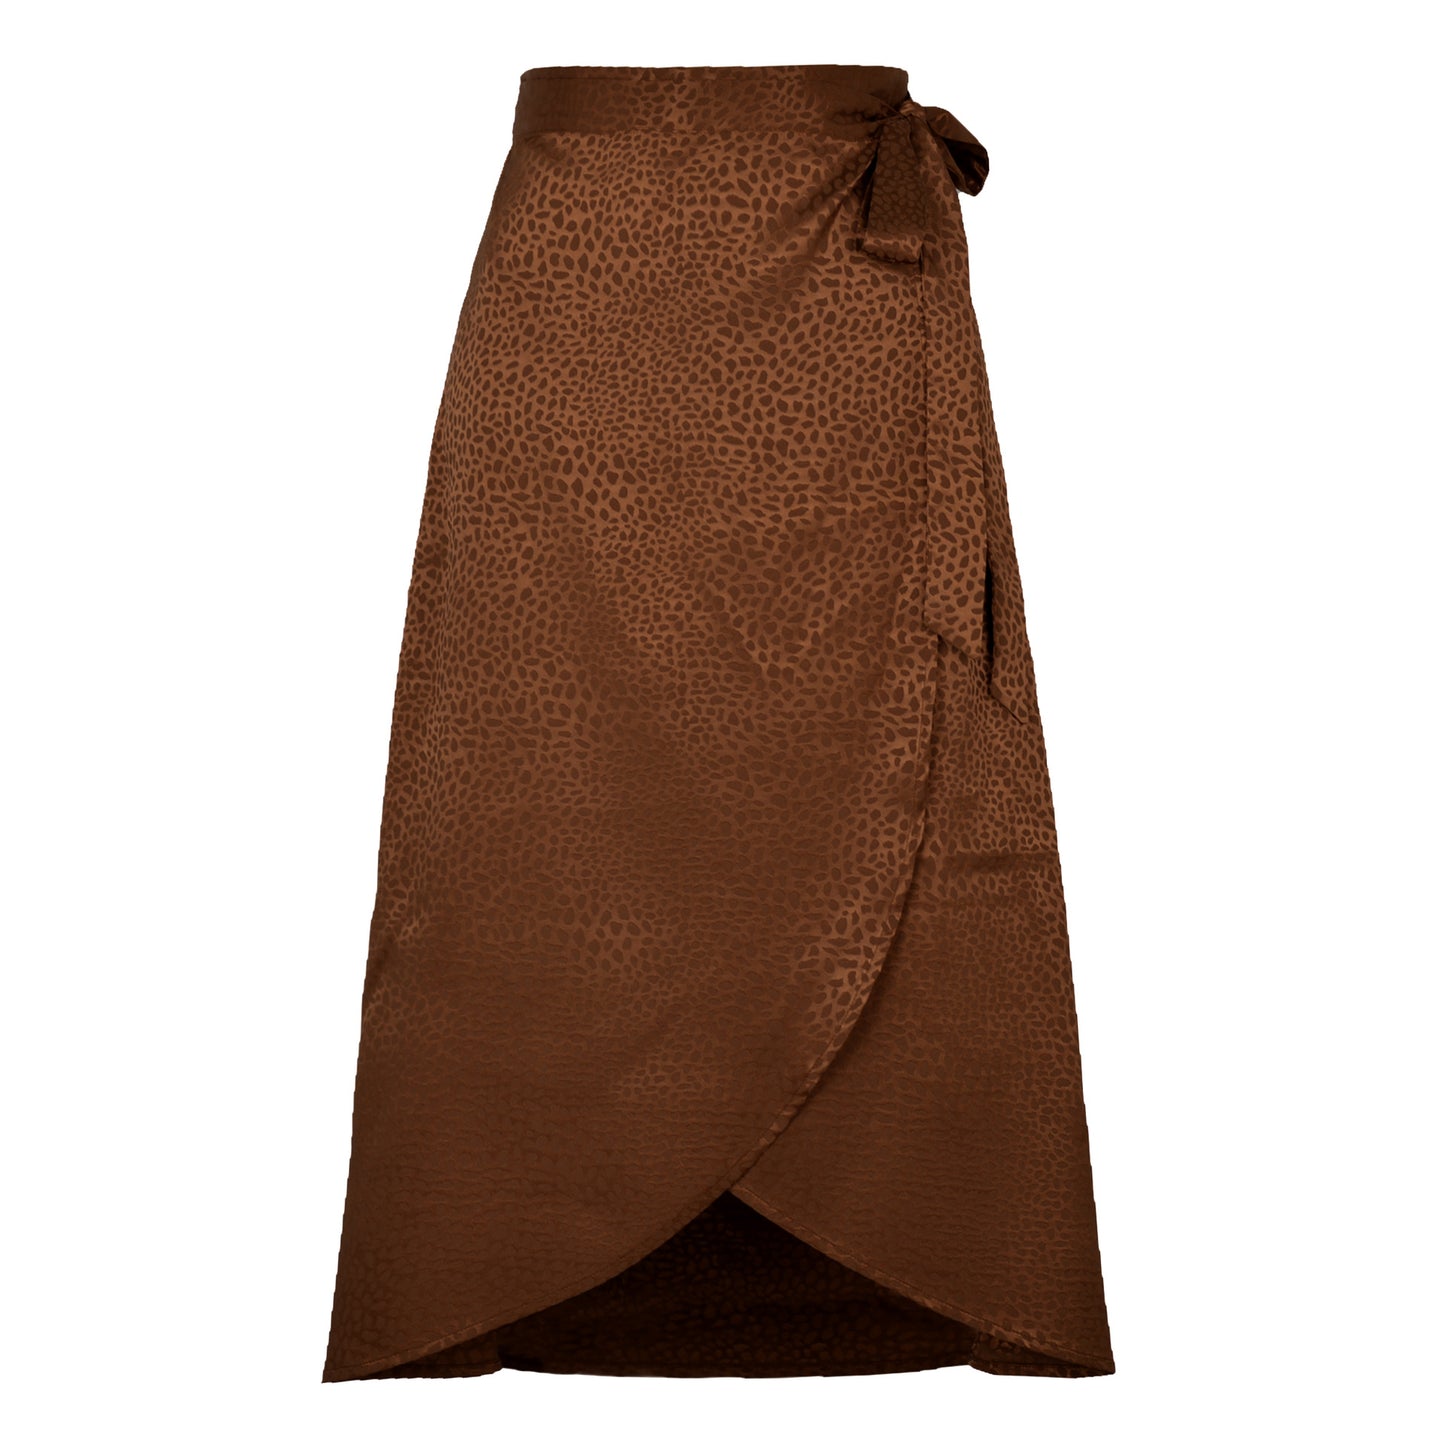 High Waist Jacquard Skirt with Tie for Women